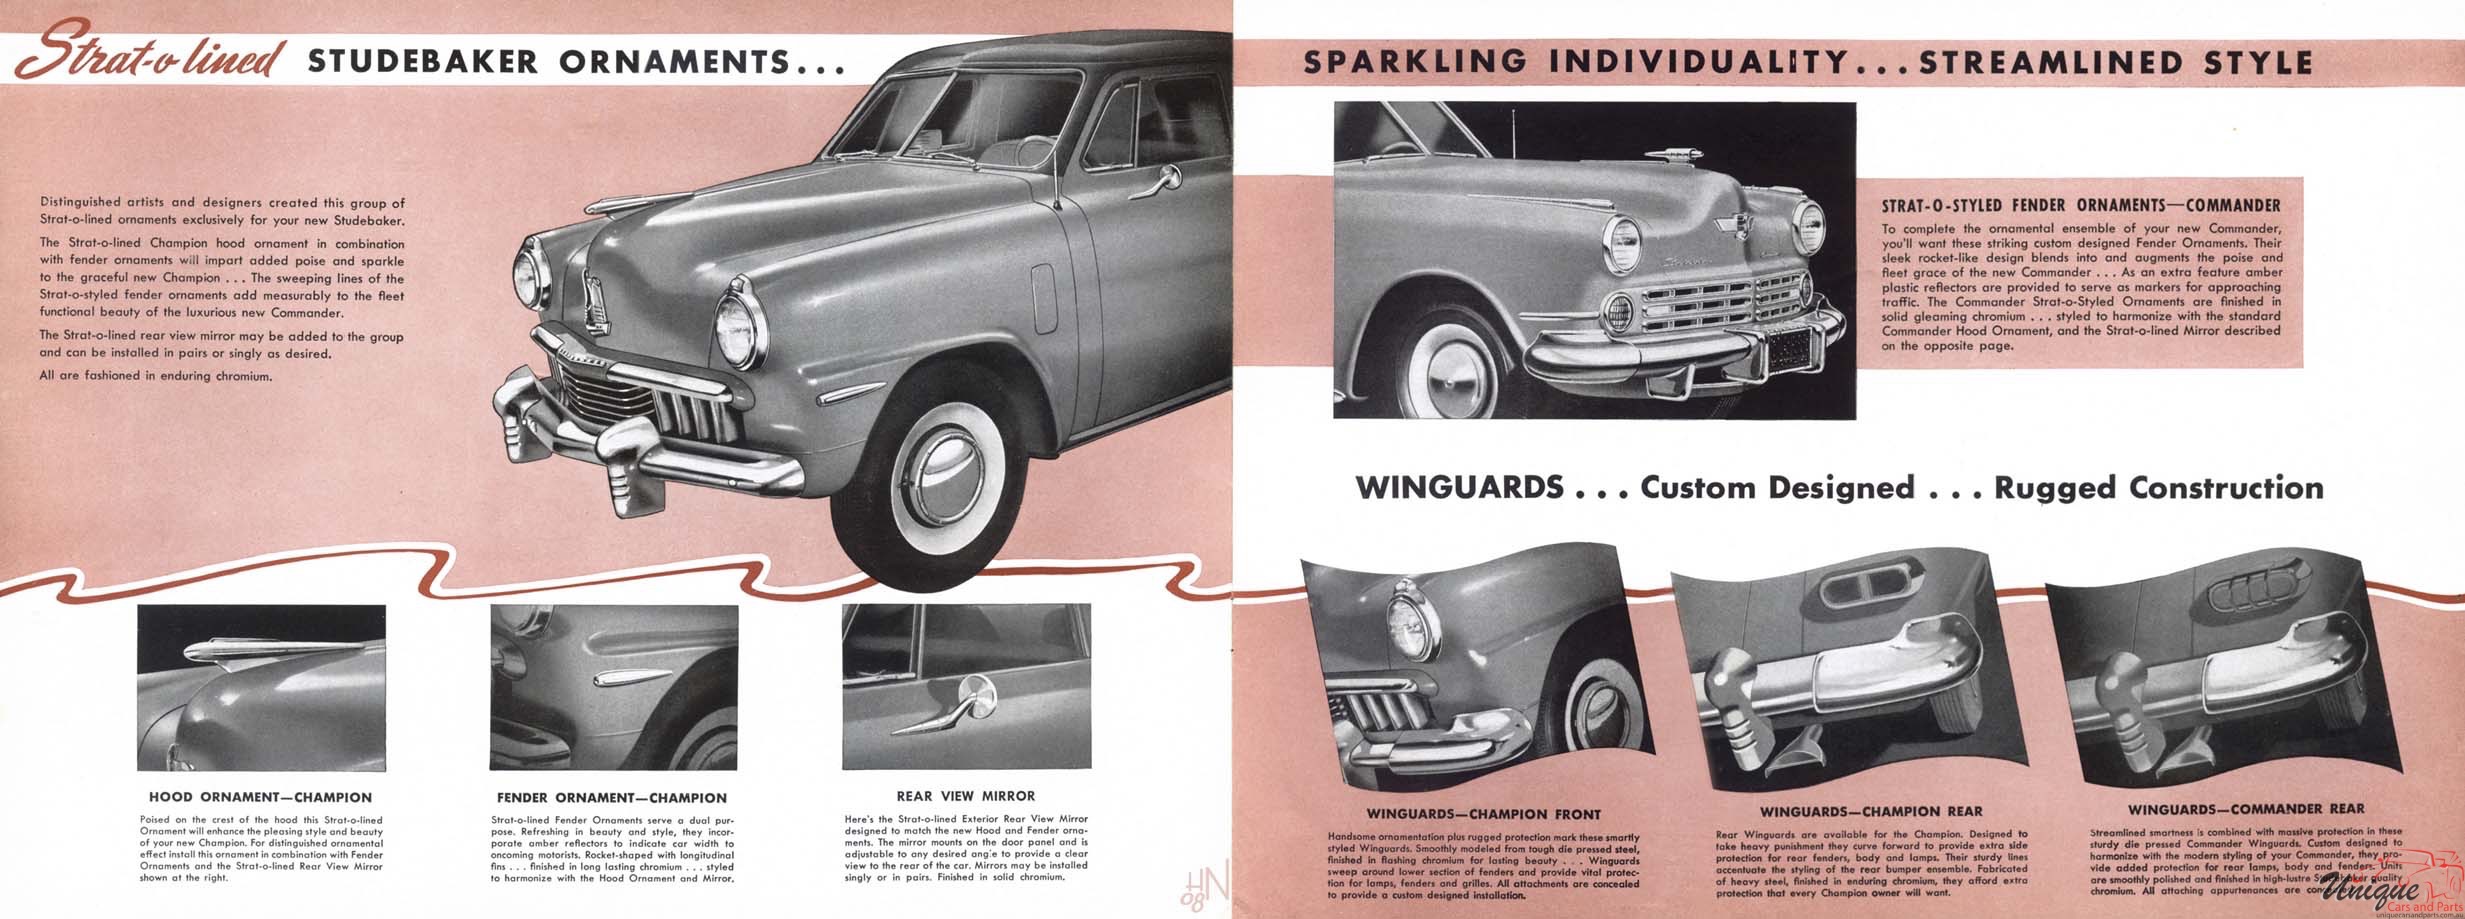 1947 Studebaker Accessories Booklet Page 11